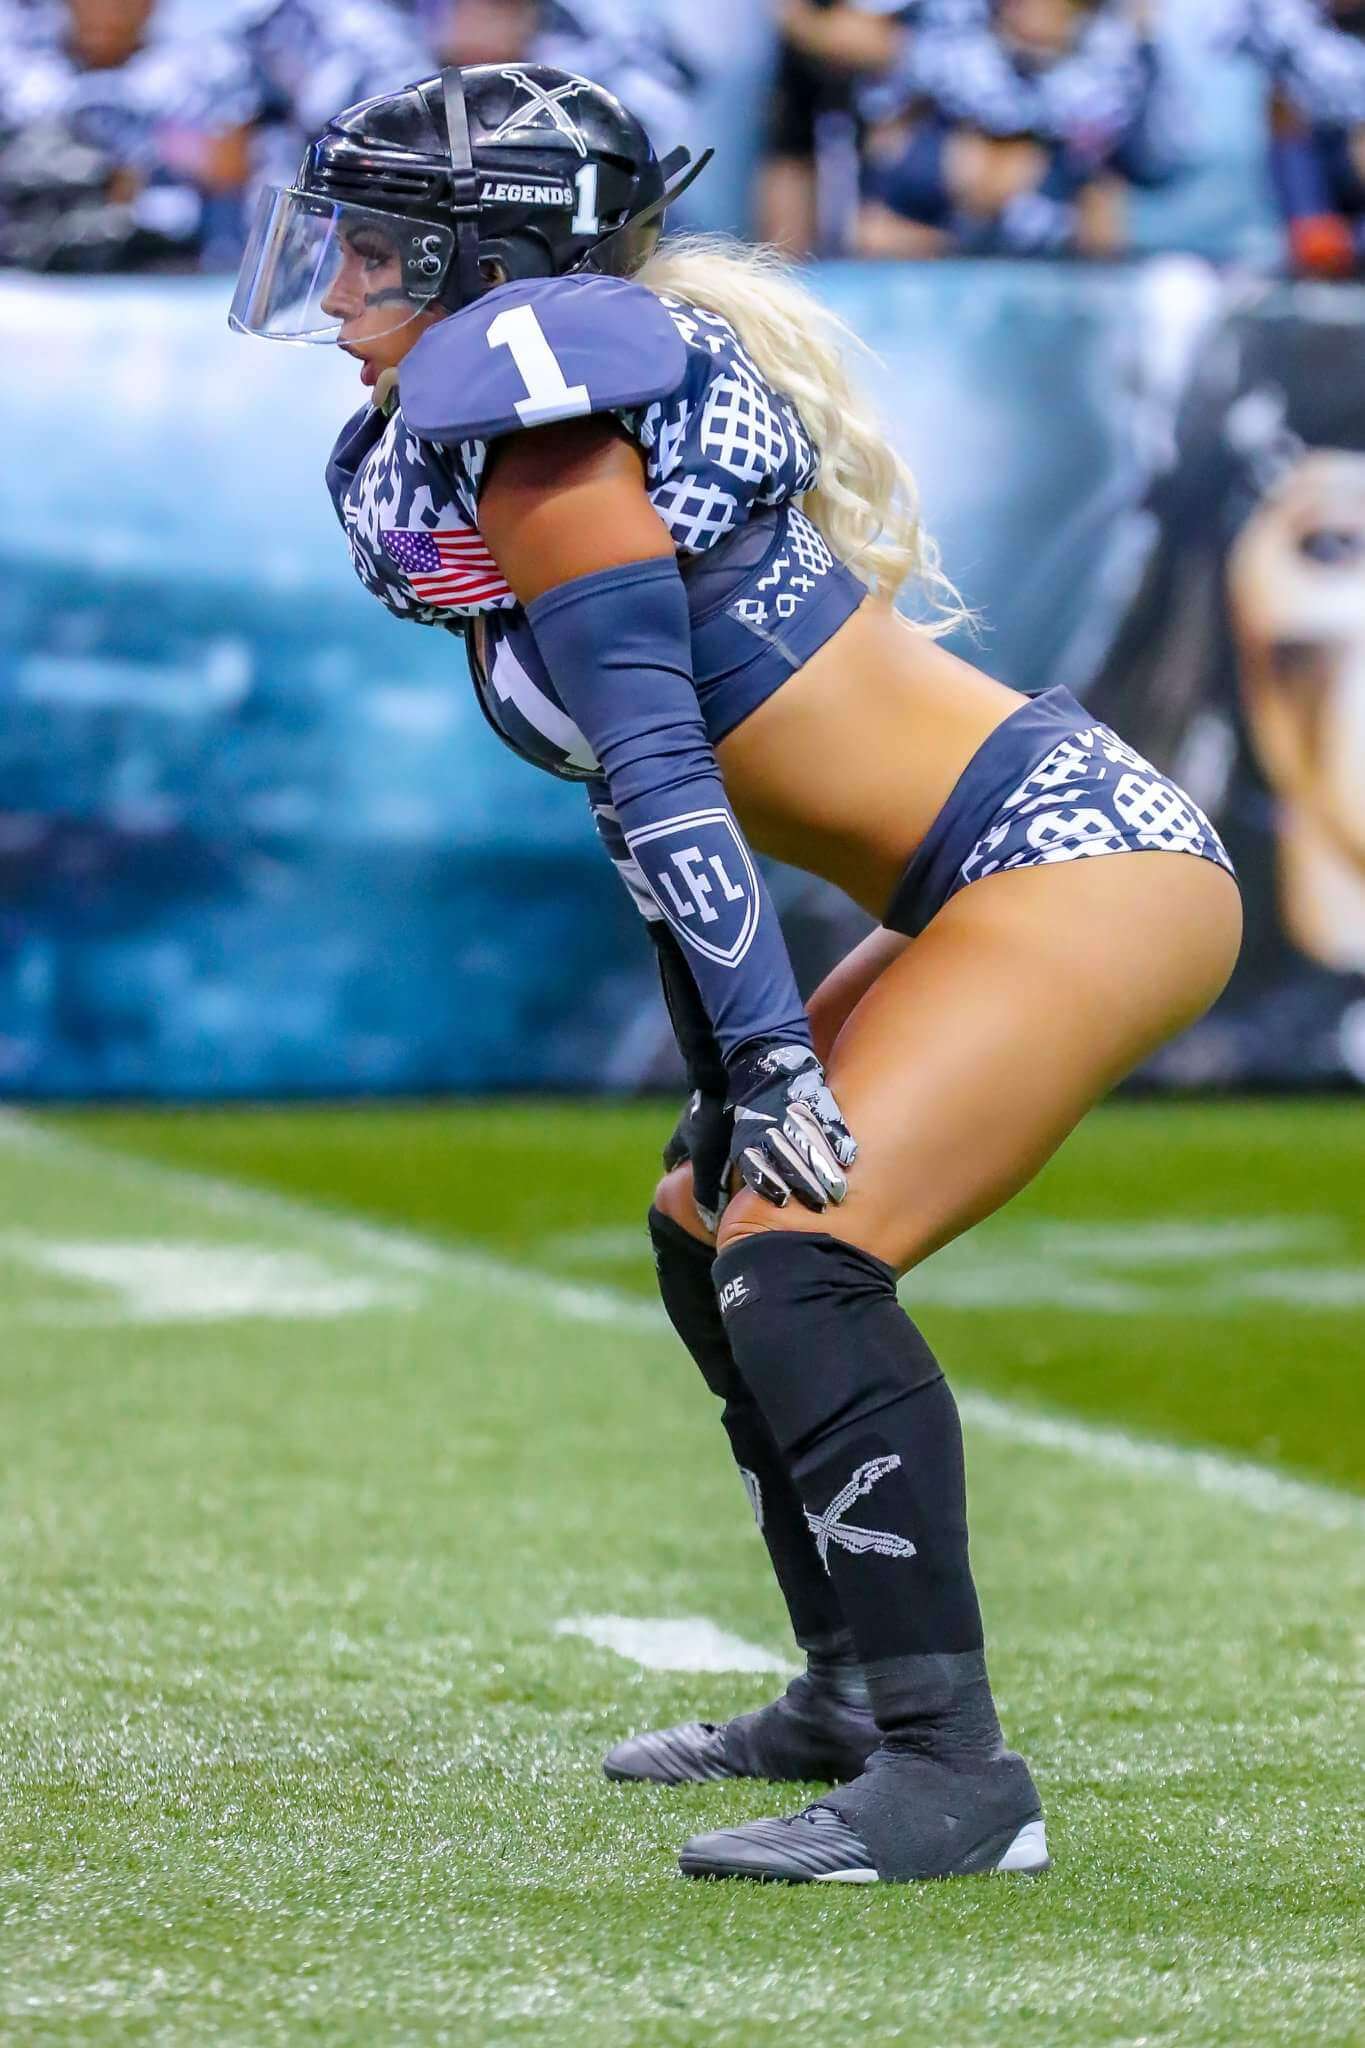 The Legends Football League Beautiful Women And Football, Need We Say Anymore! 26